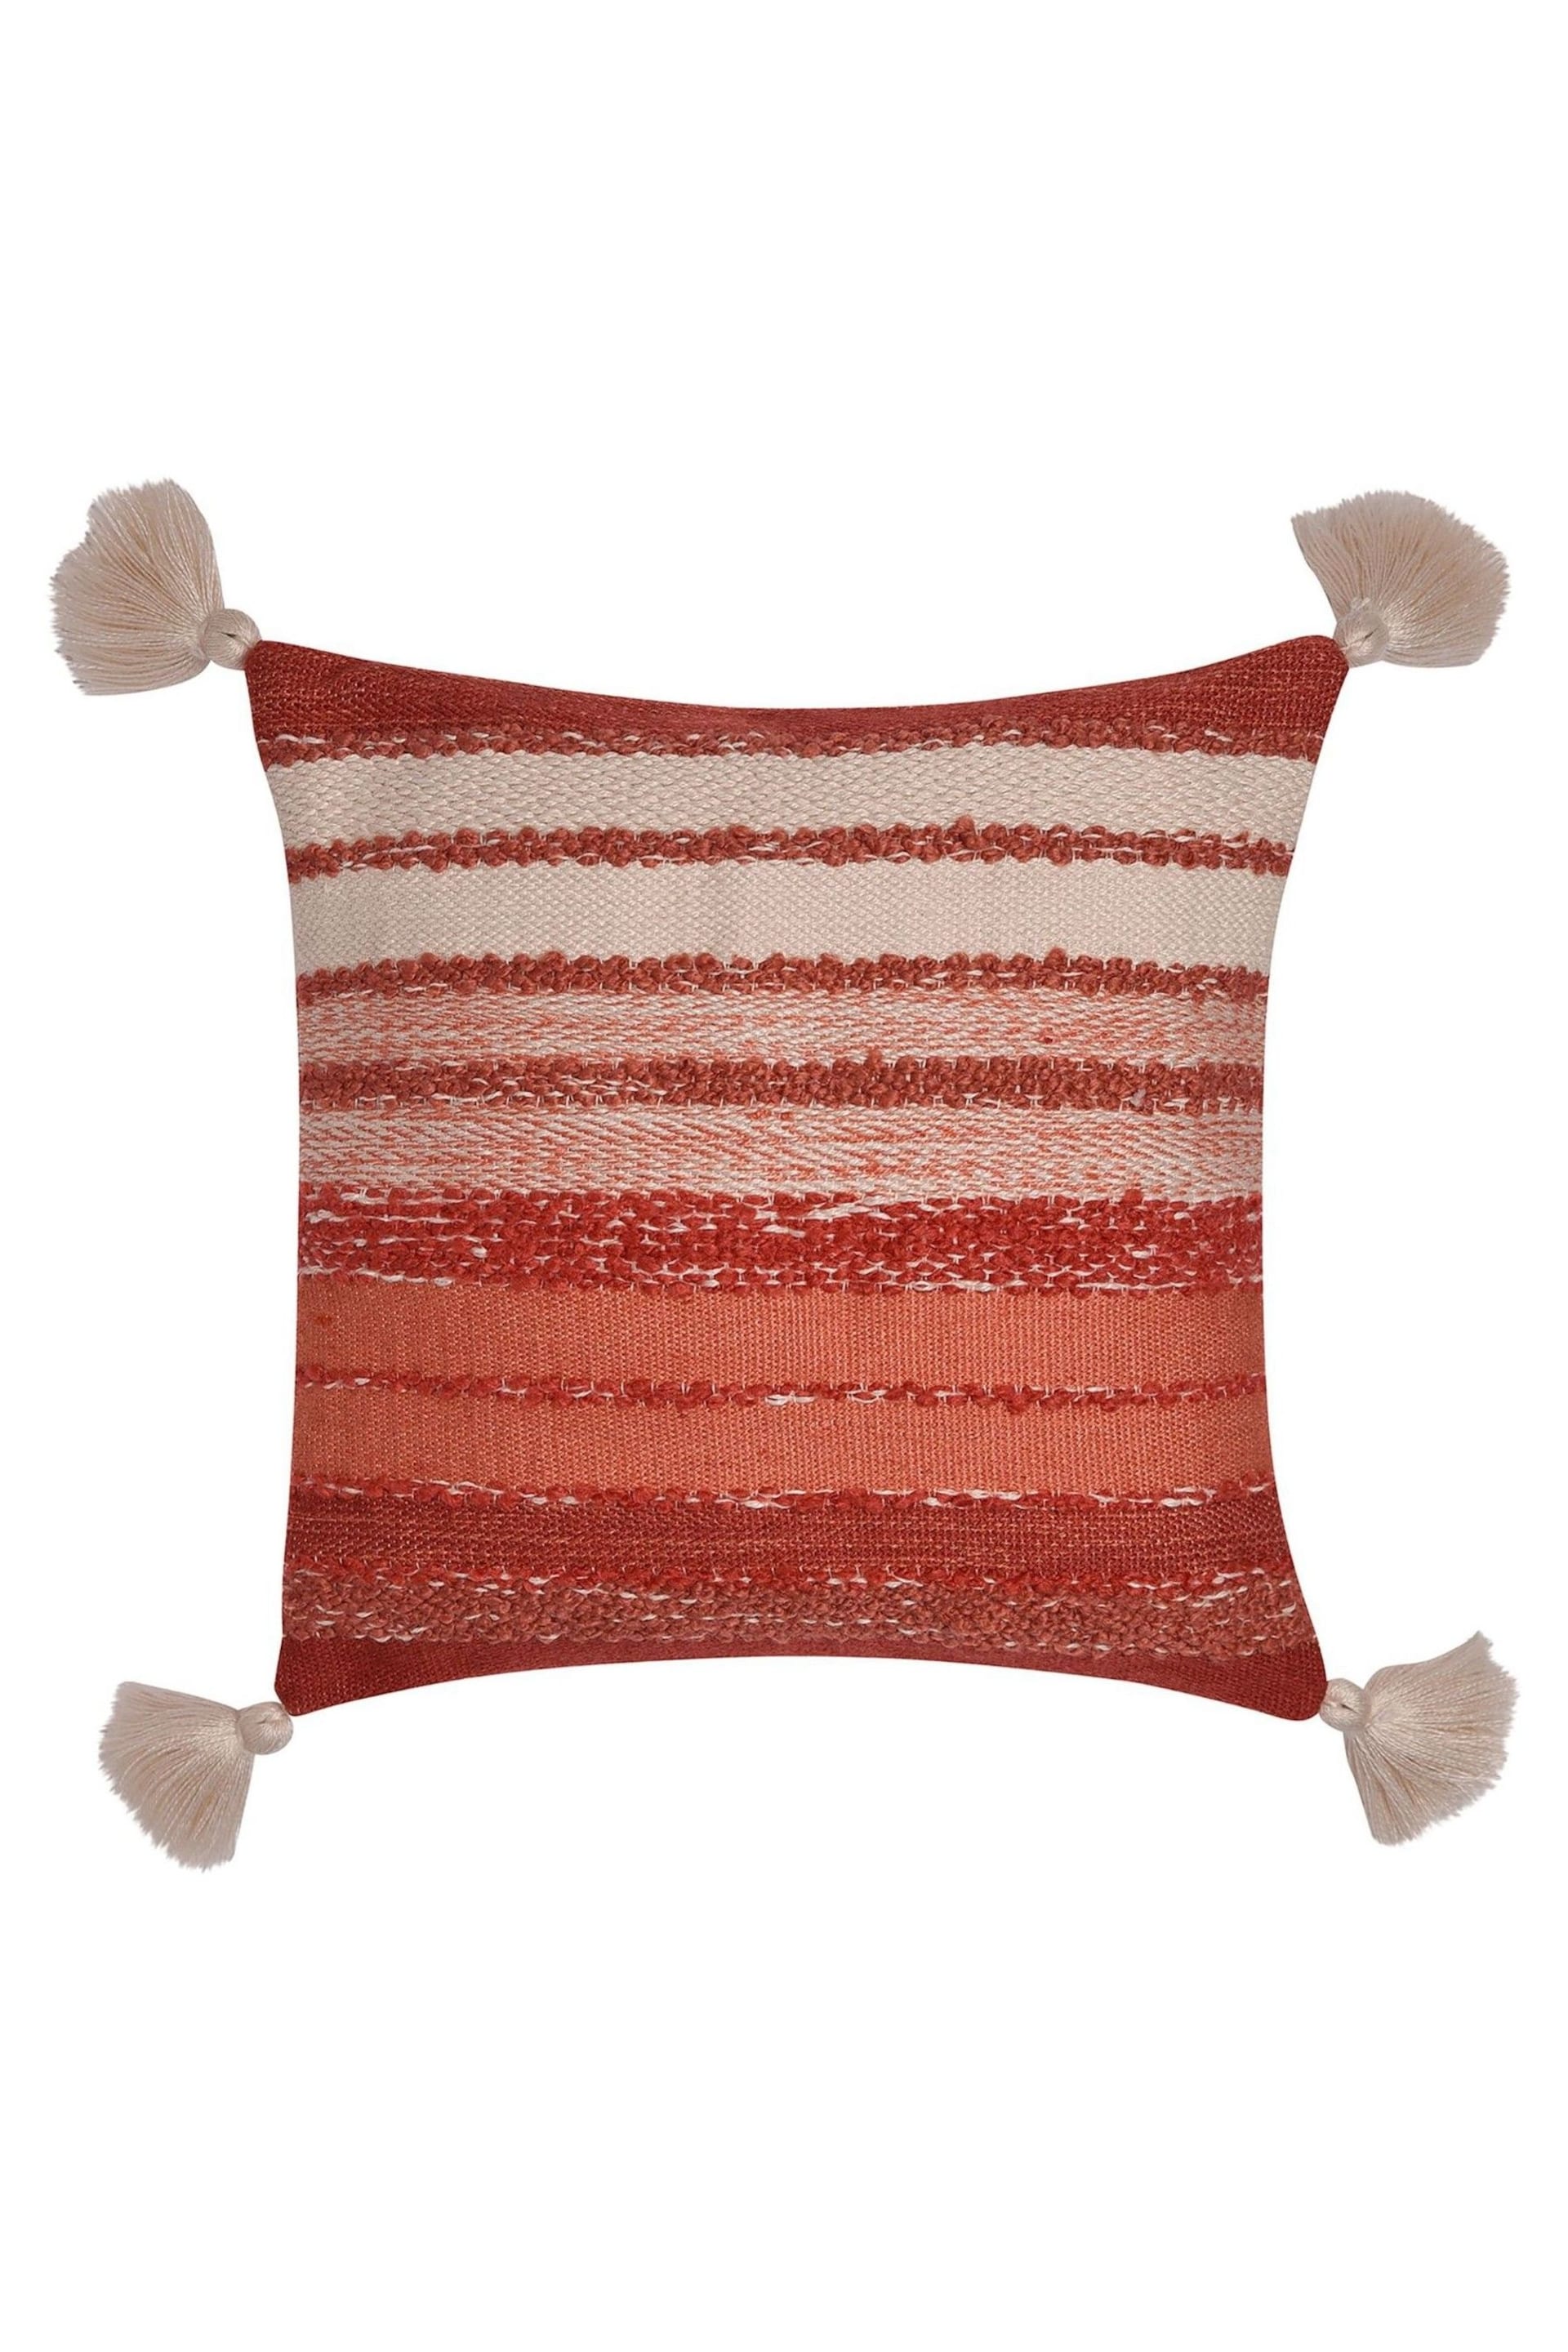 Drift Home Terracotta Red Grayson Outdoor Filled Cushion - Image 3 of 5